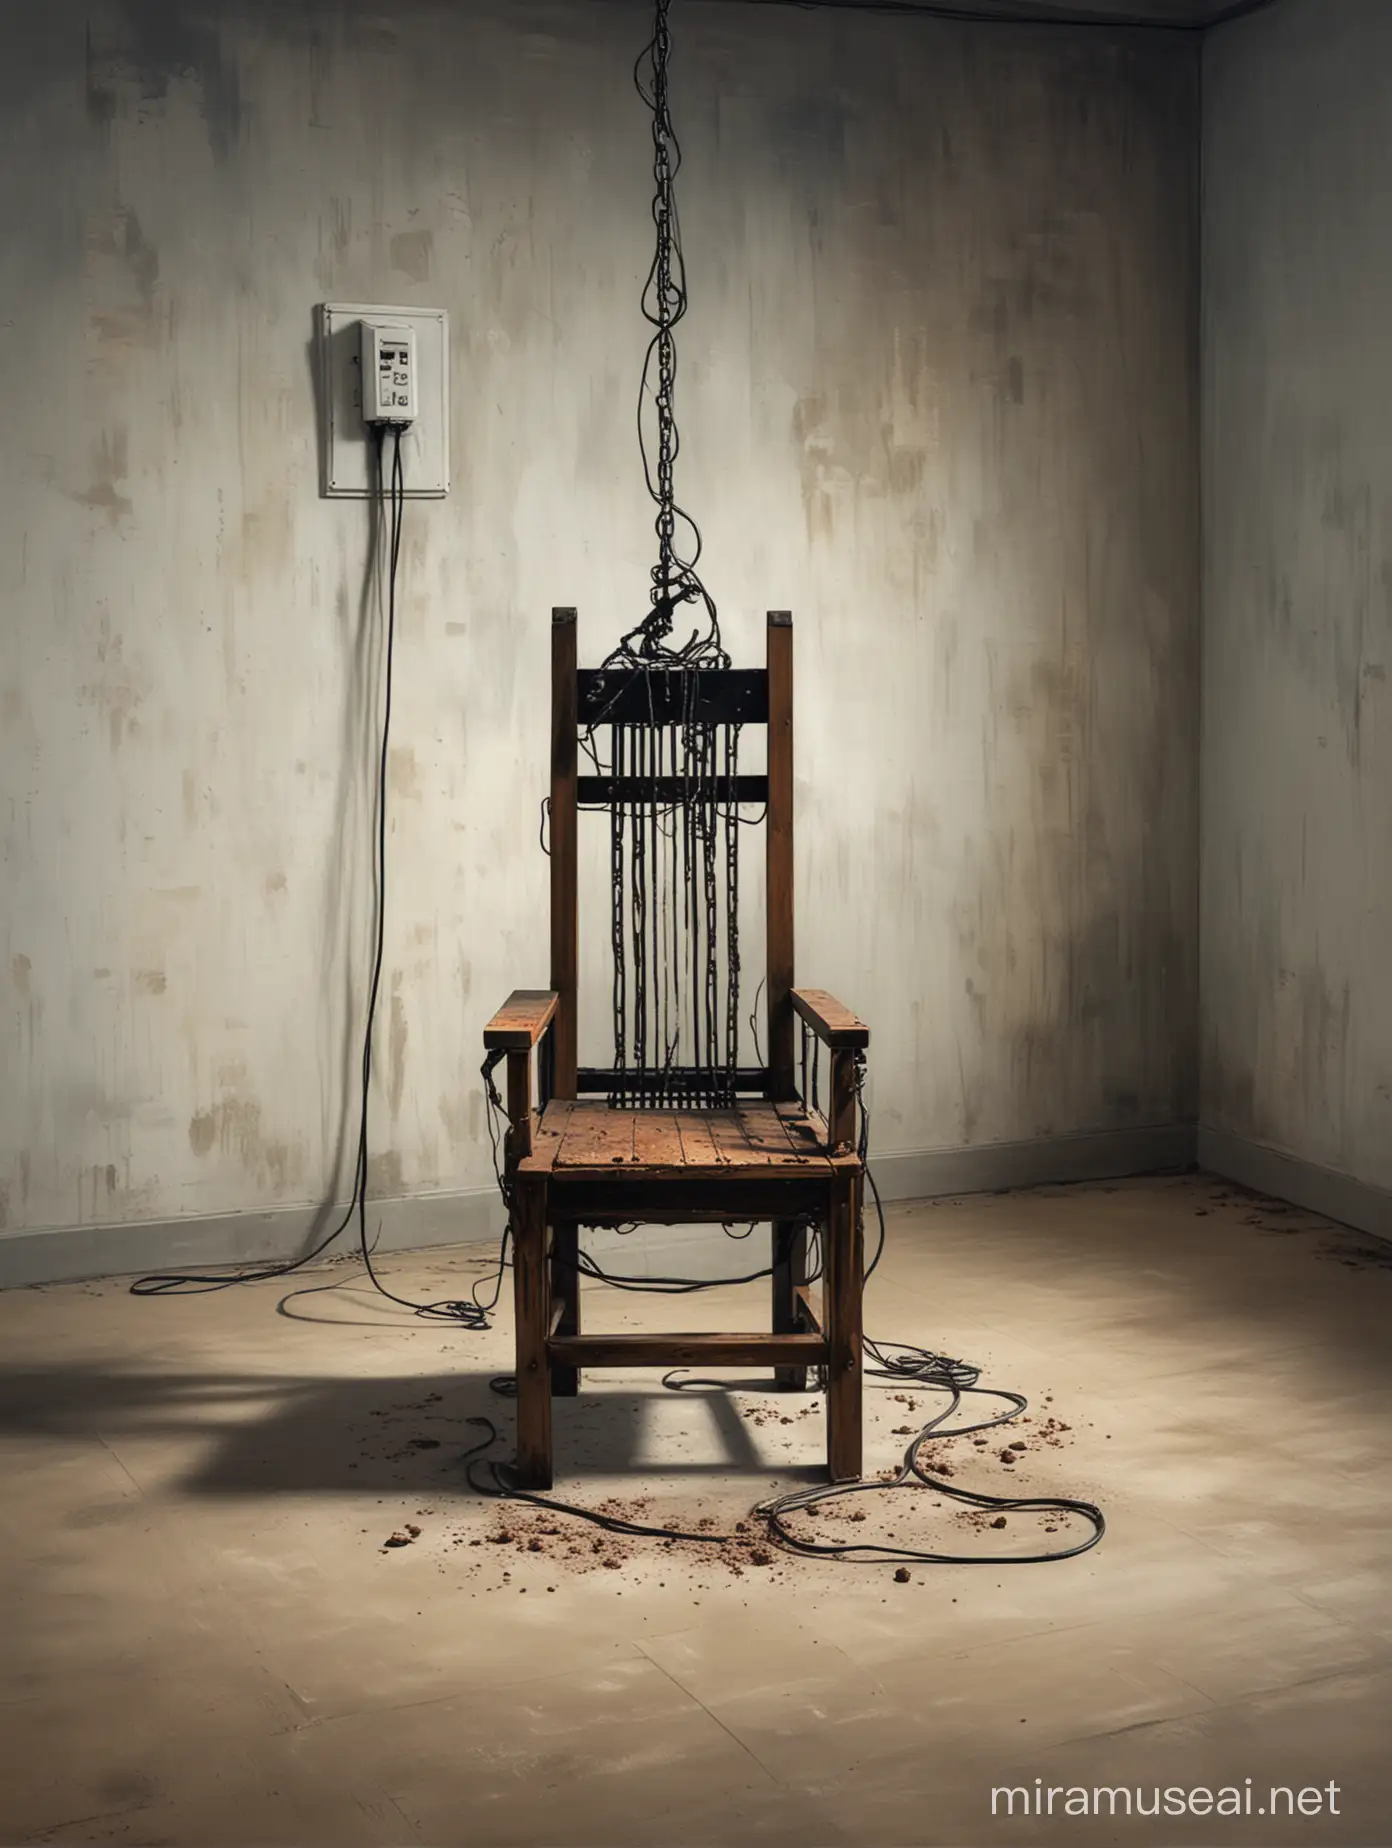 electric chair before execution, atmosphere of fear and anxiety, modern art